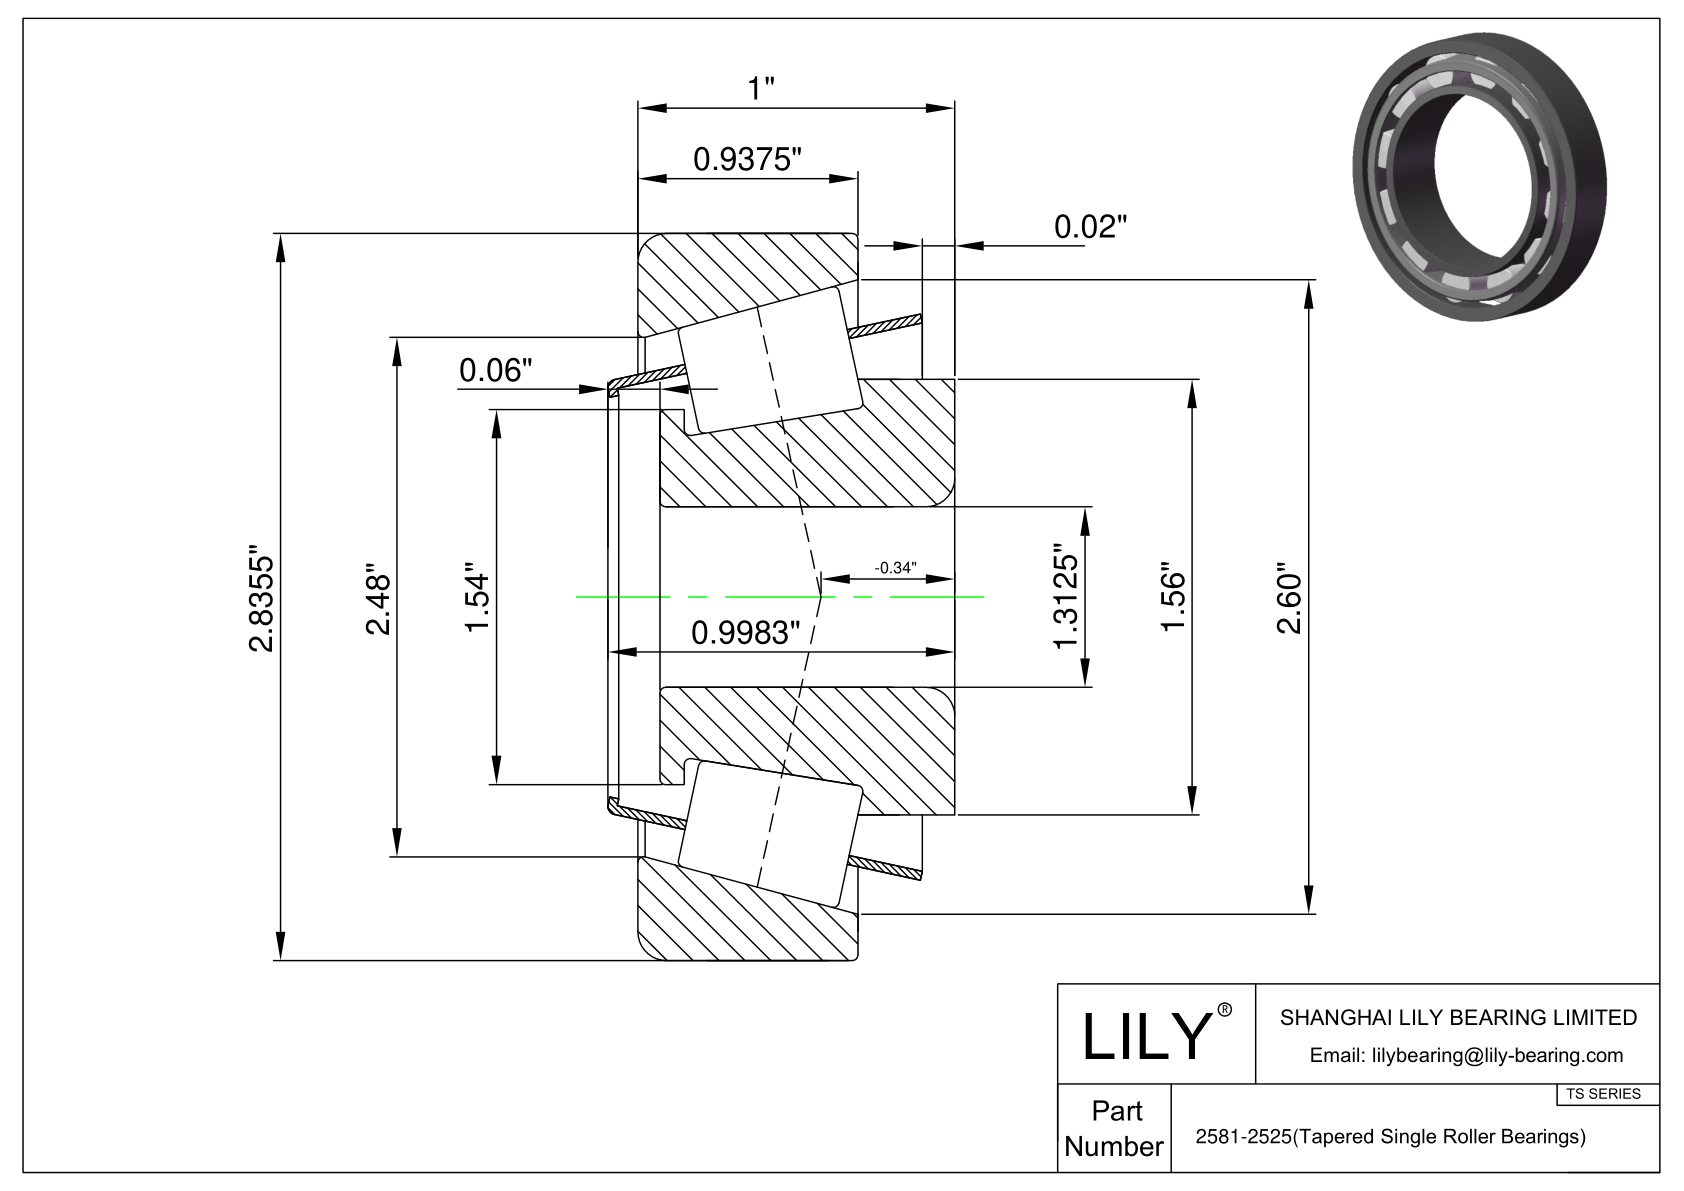 2581-2525 TS (Tapered Single Roller Bearings) (Imperial) cad drawing